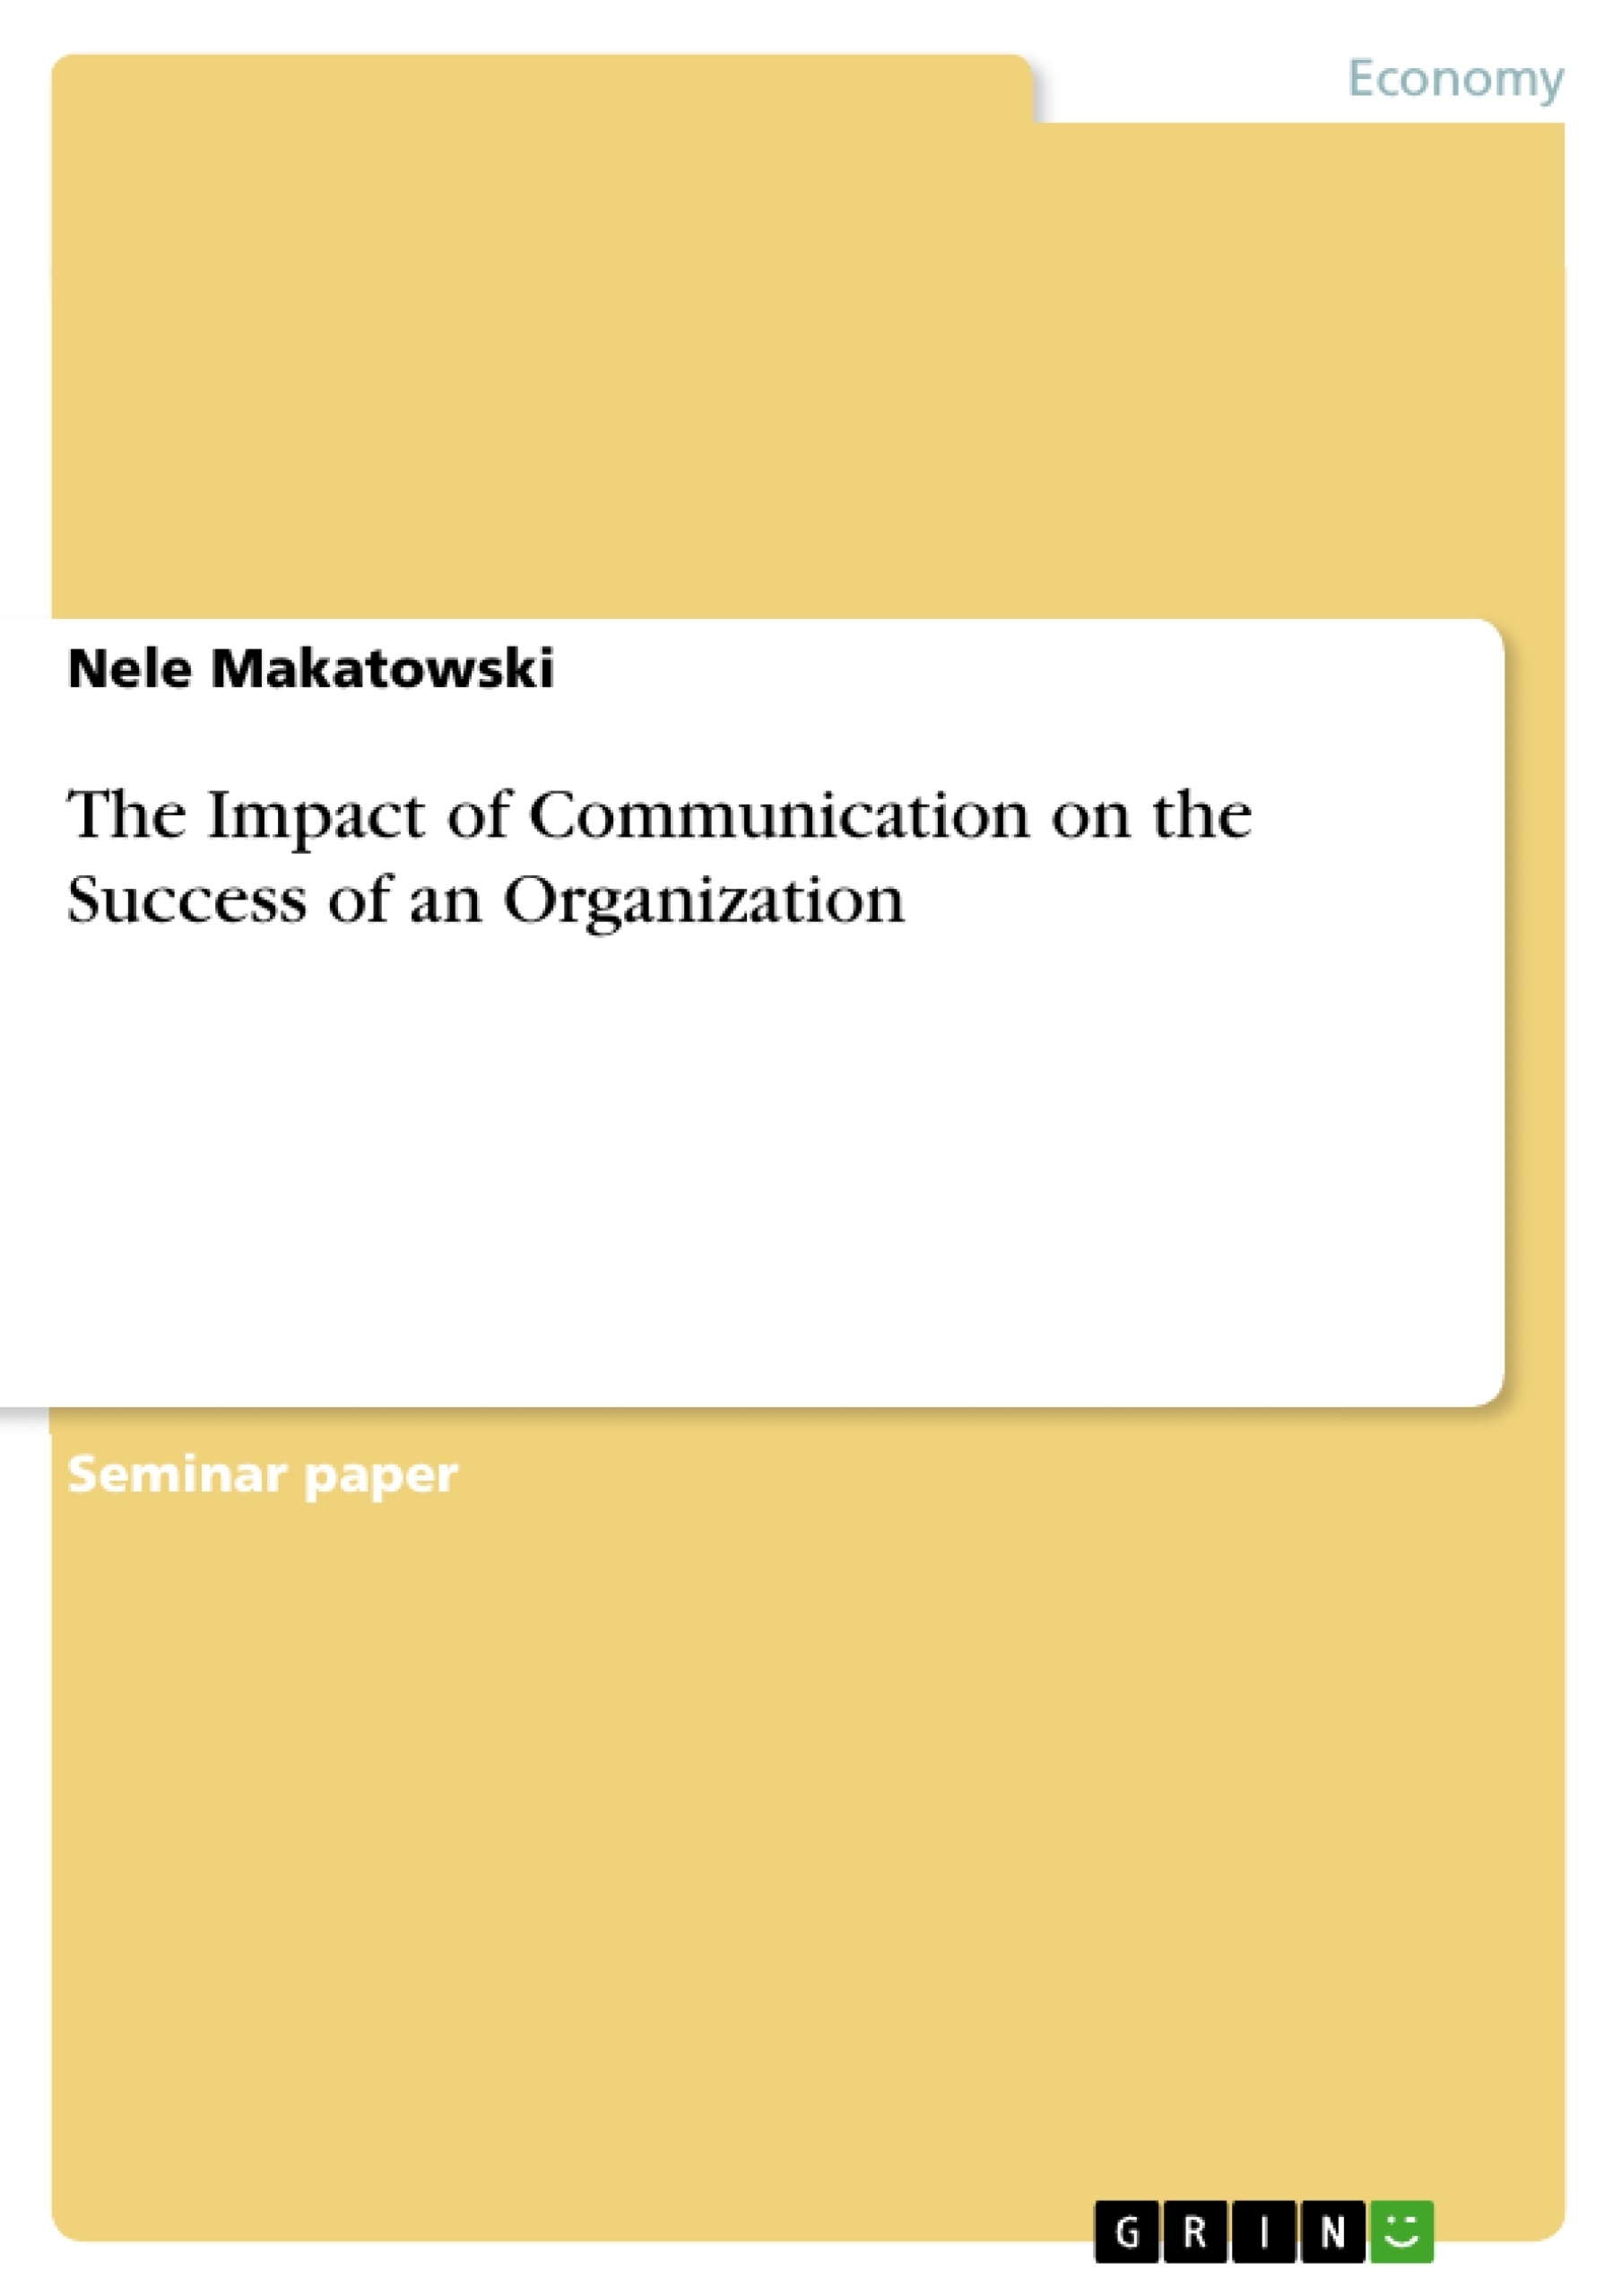 Title: The Impact of Communication on the Success of an Organization